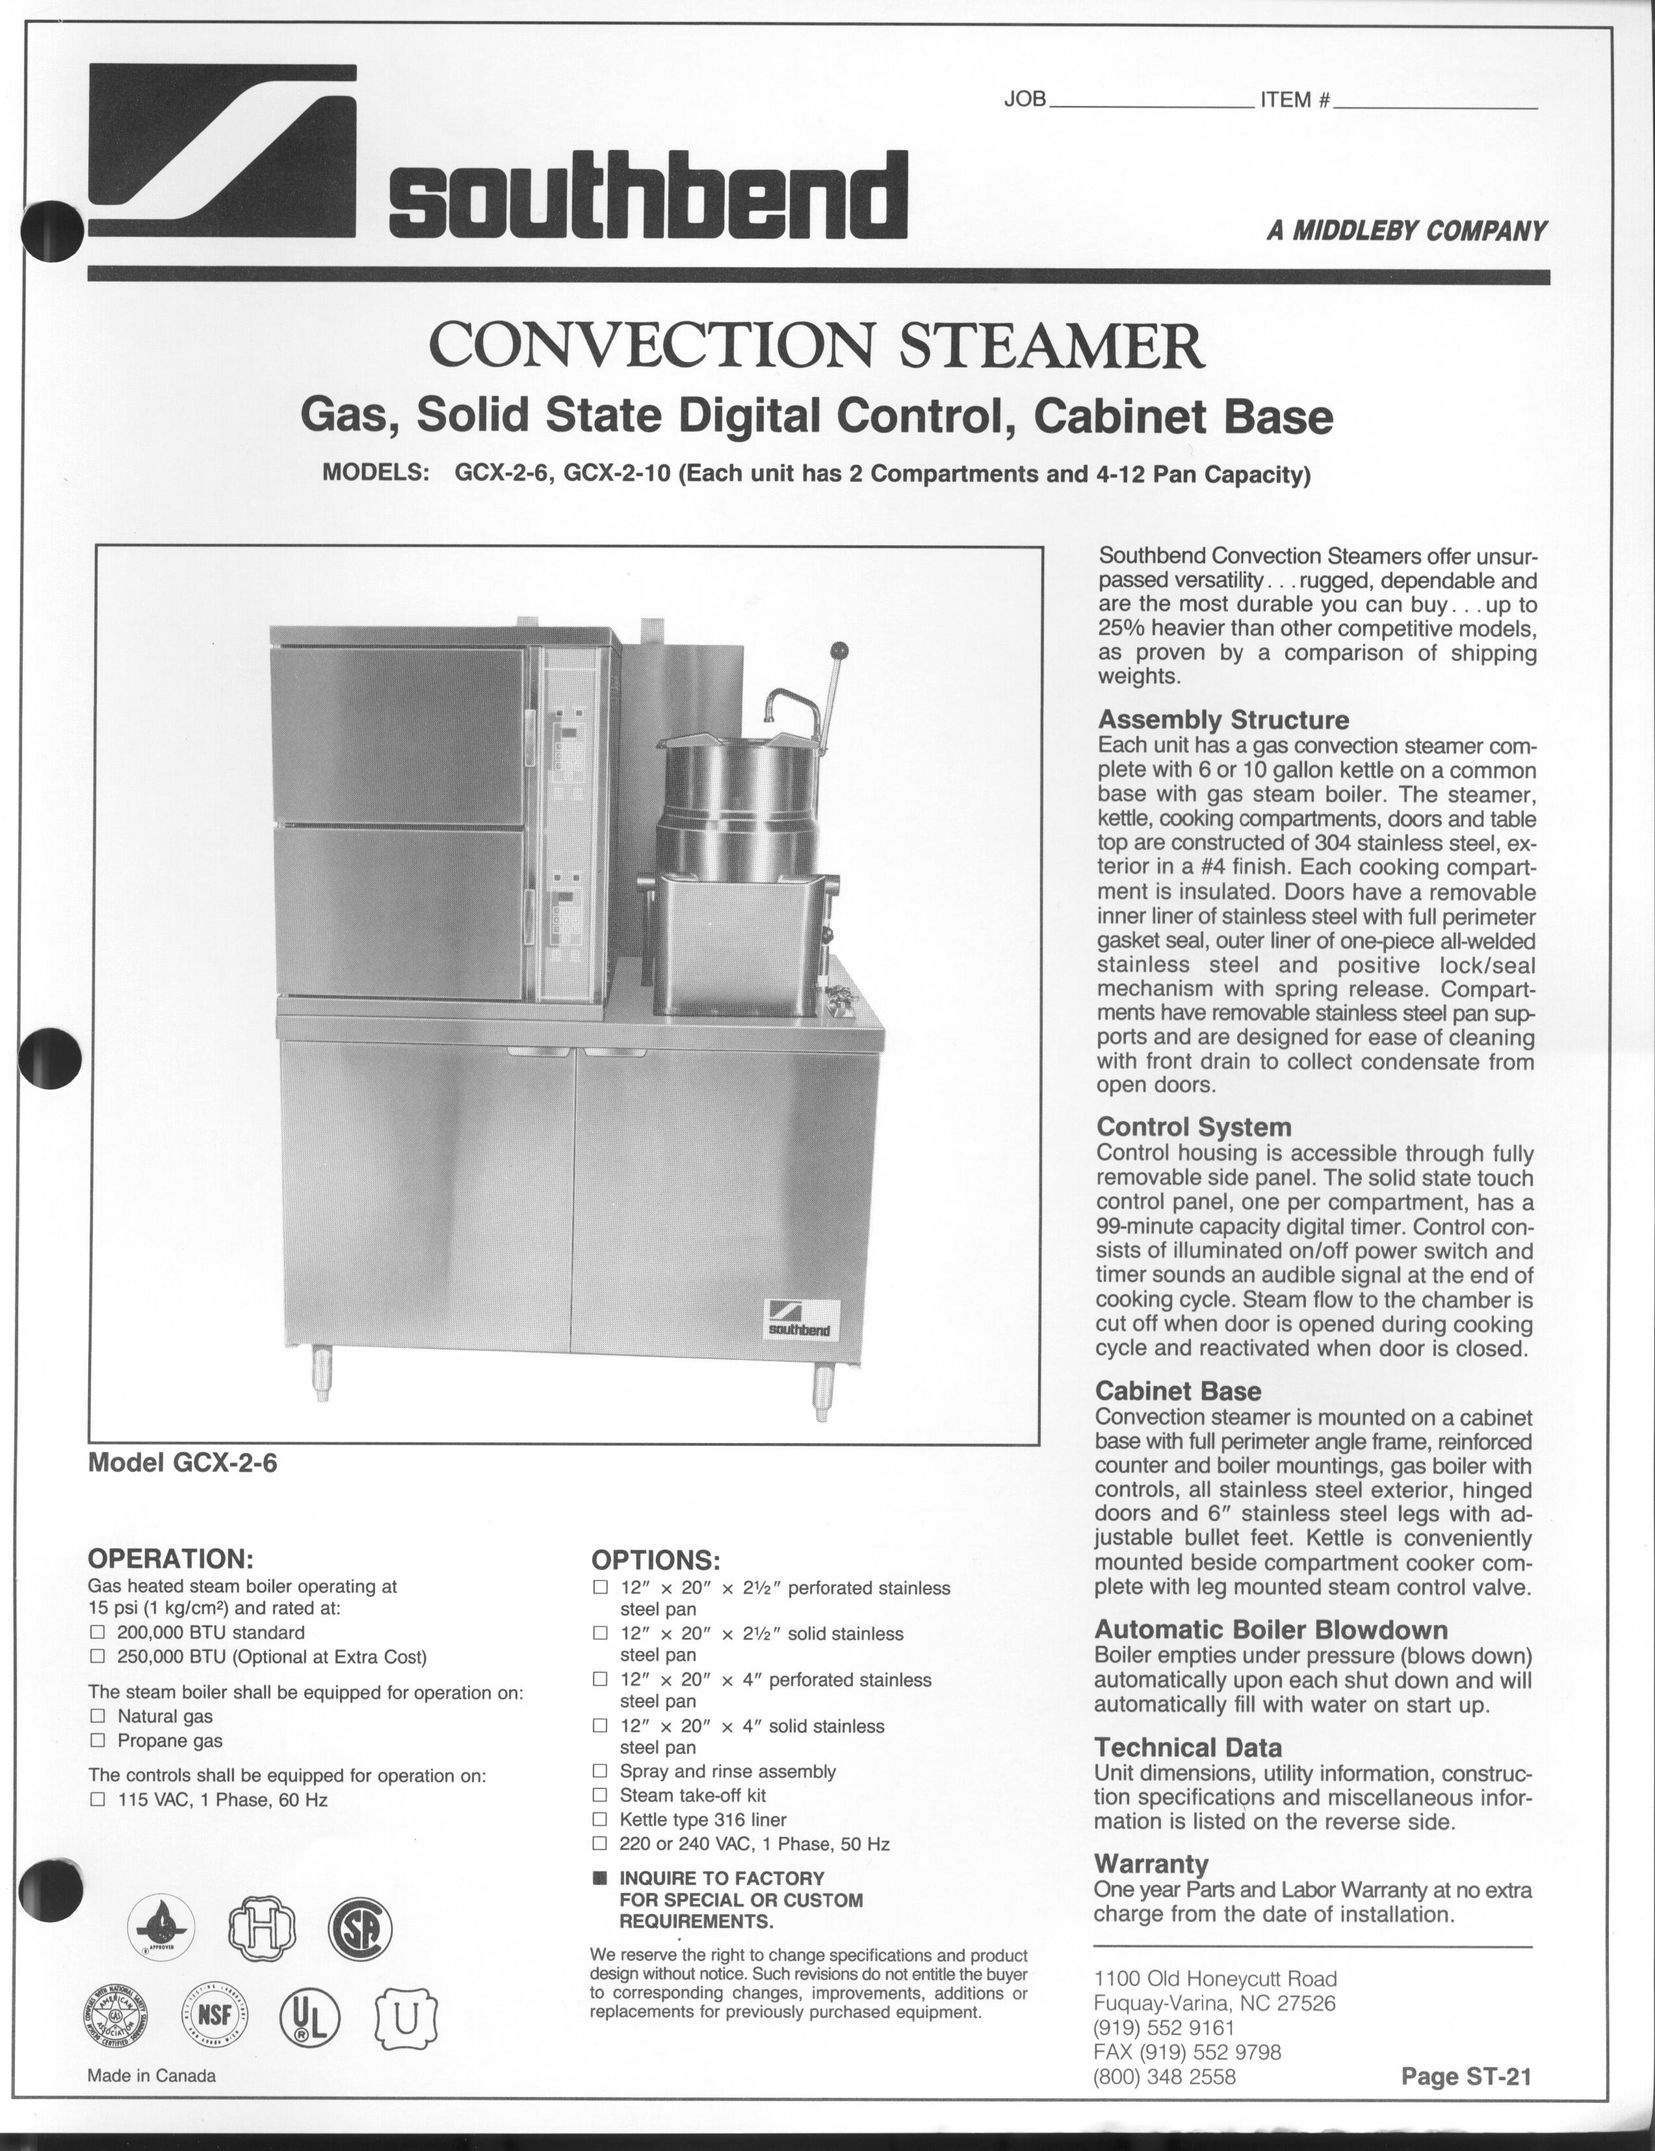 Southbend GCX-2-10 Convection Oven User Manual